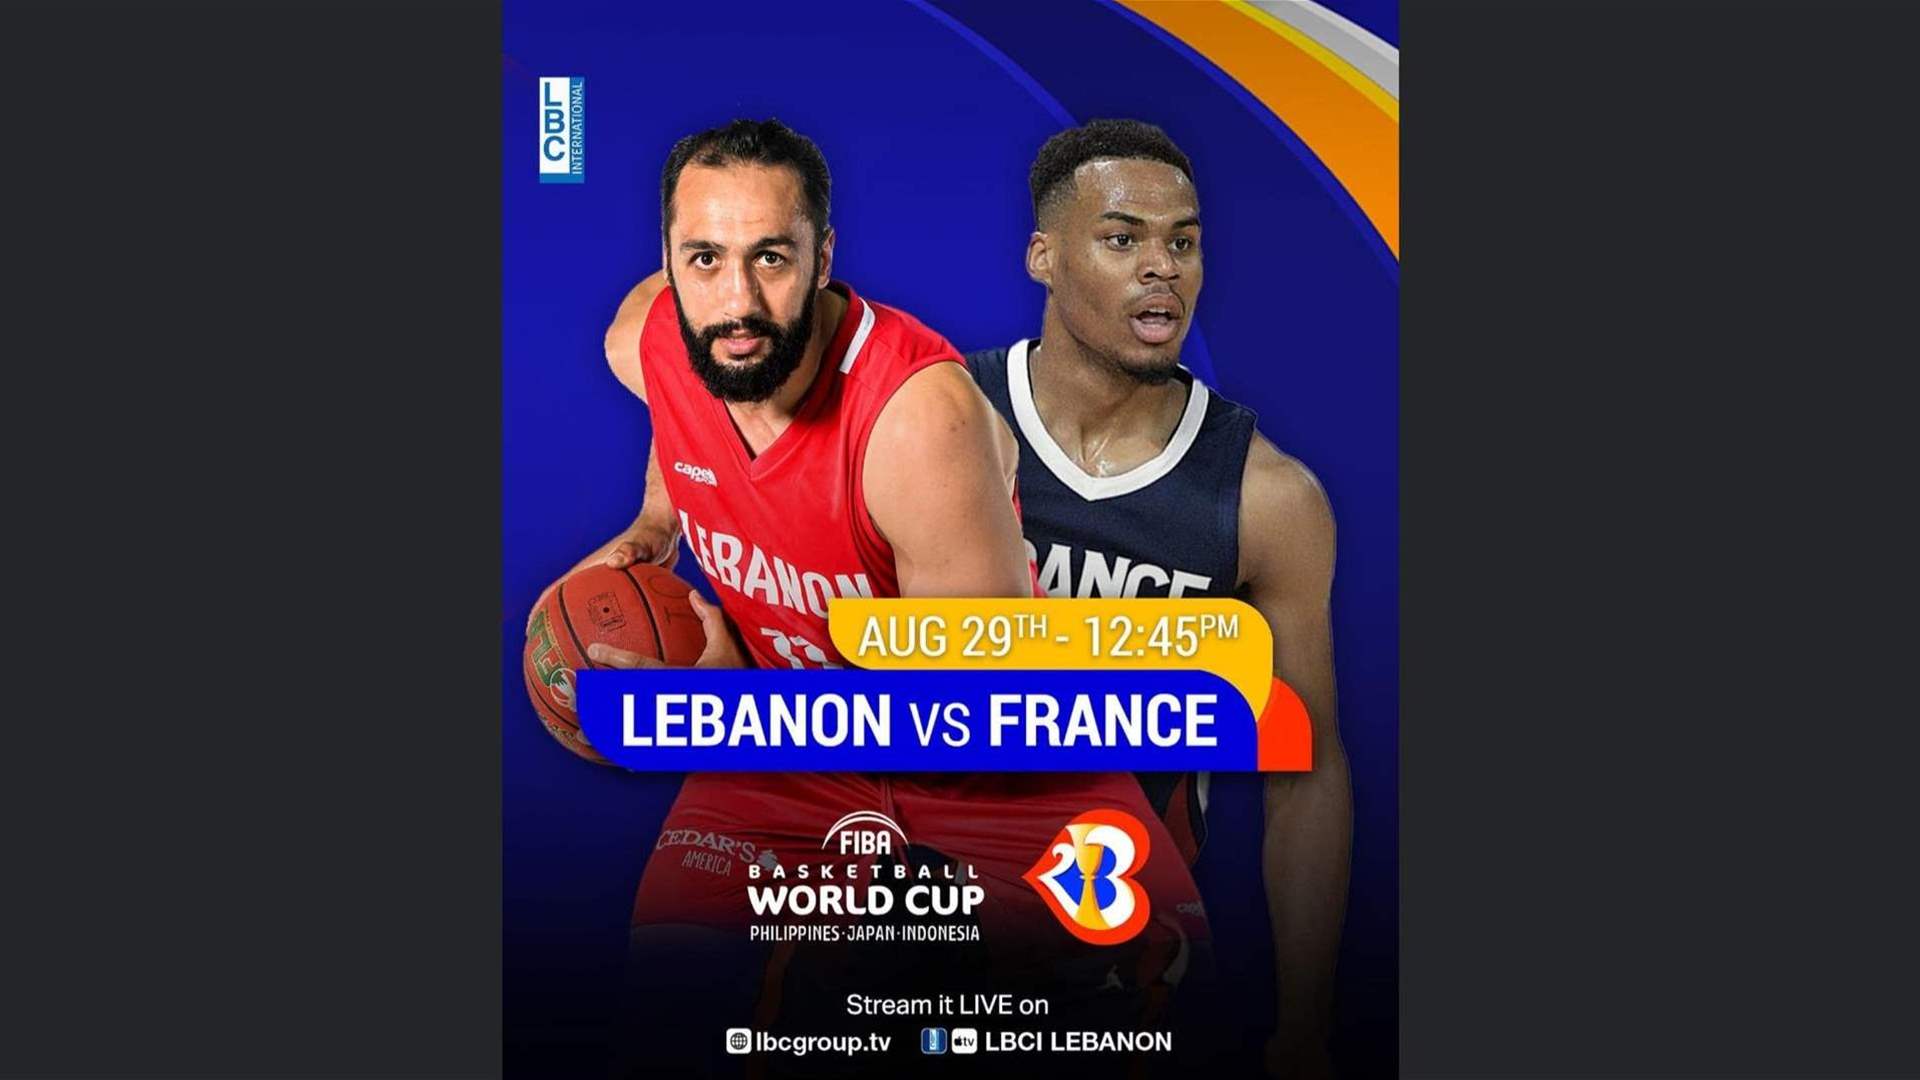 Tip-off Alert! Lebanon vs France in the FIBA Basketball World Cup at 12:45 PM. Tune in on LBCGroup.tv or LB2!